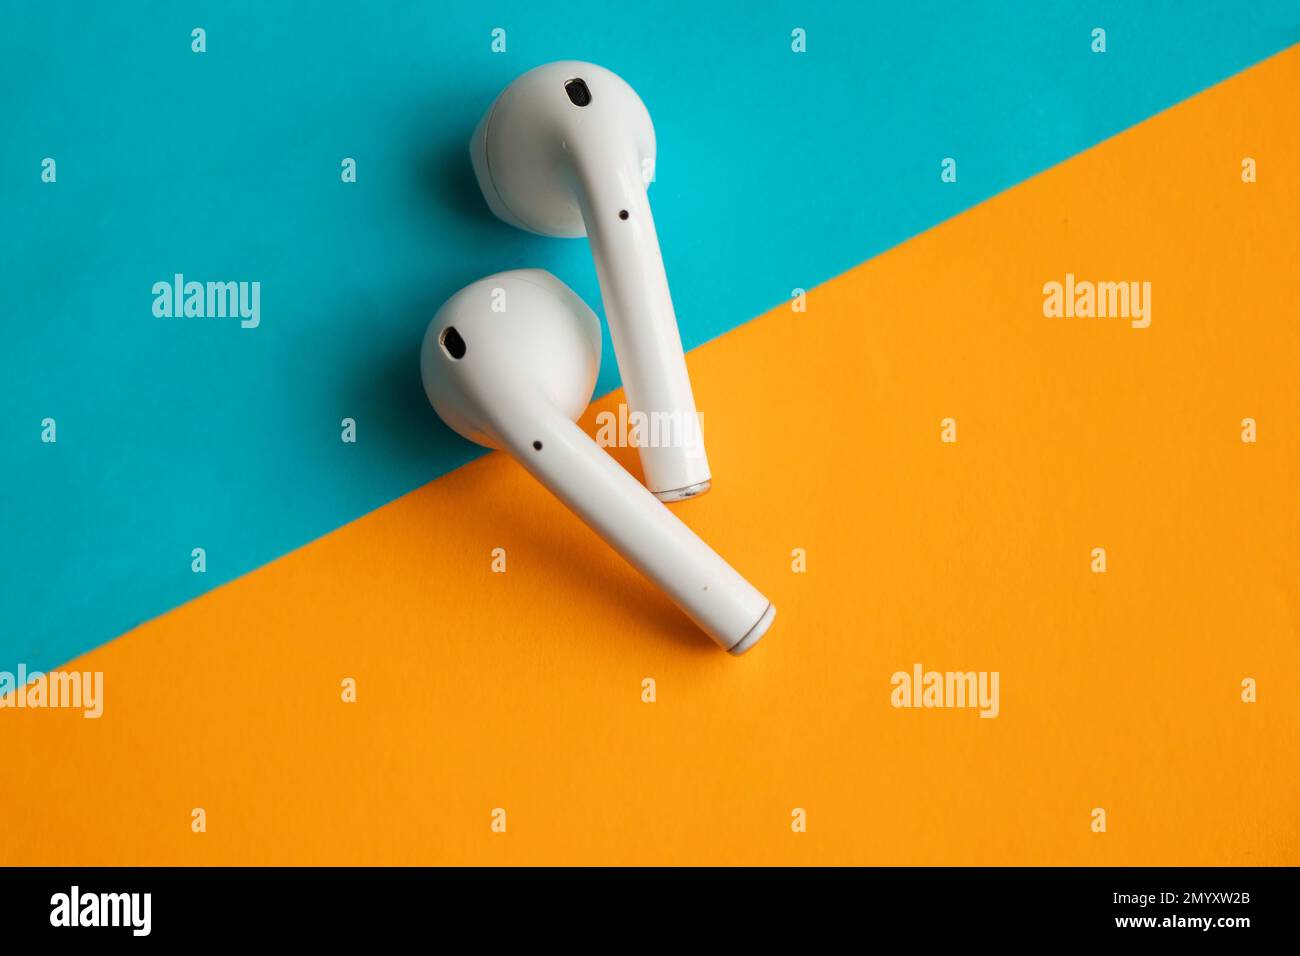 wireless headphones lie on a colorful background Stock Photo